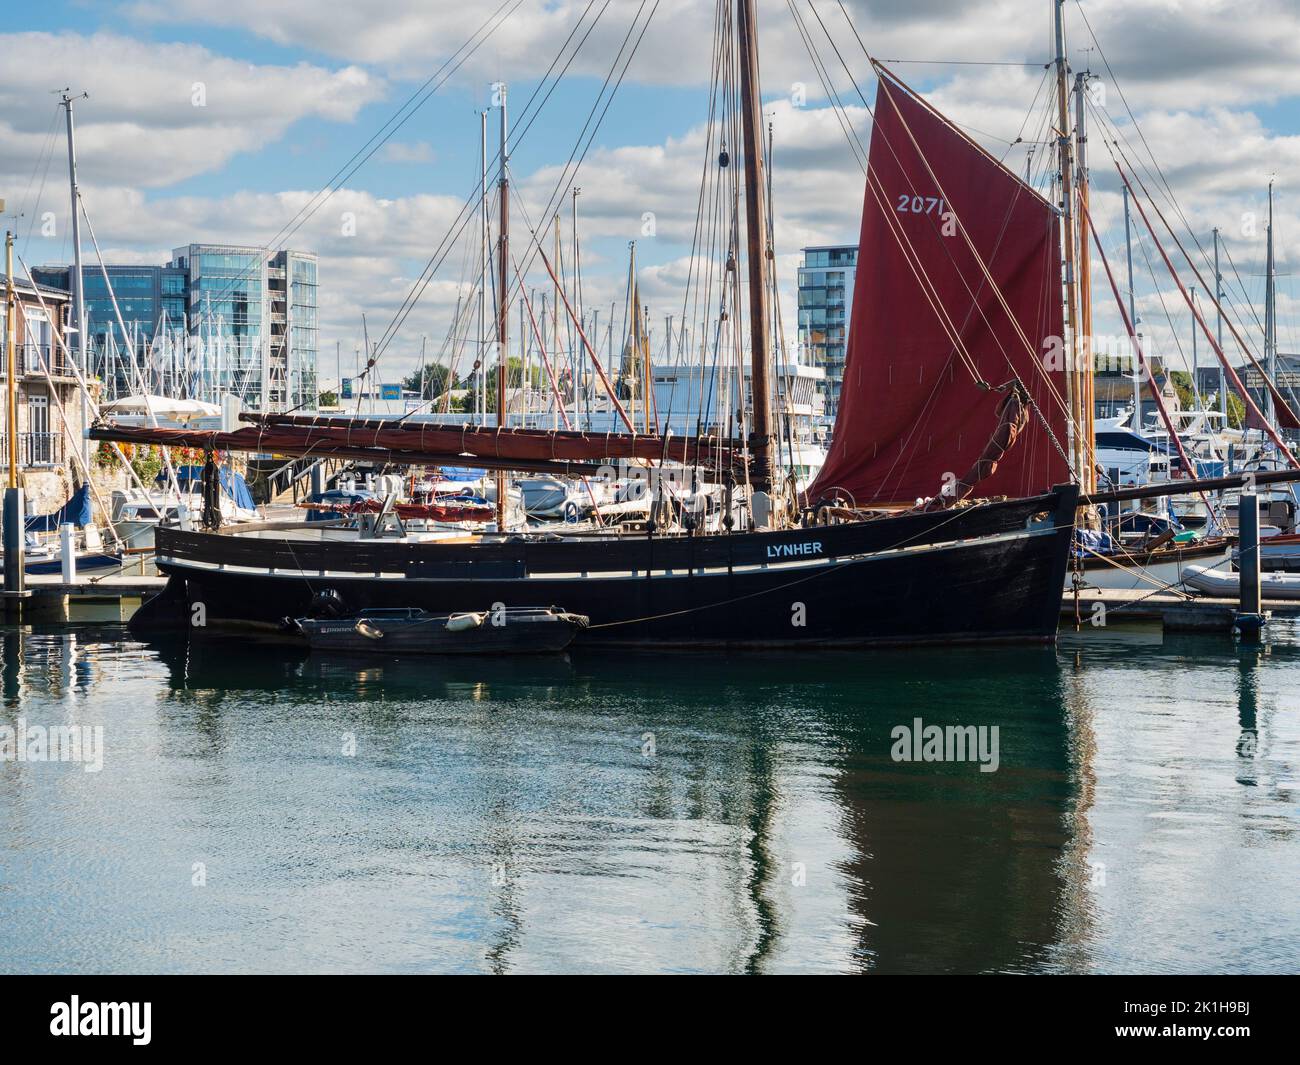 Restored historic 1896 Tamar River barge 'Lynher' at Sutton Harbour, Plymouth, Devon during the seafood festival 2022 Stock Photo